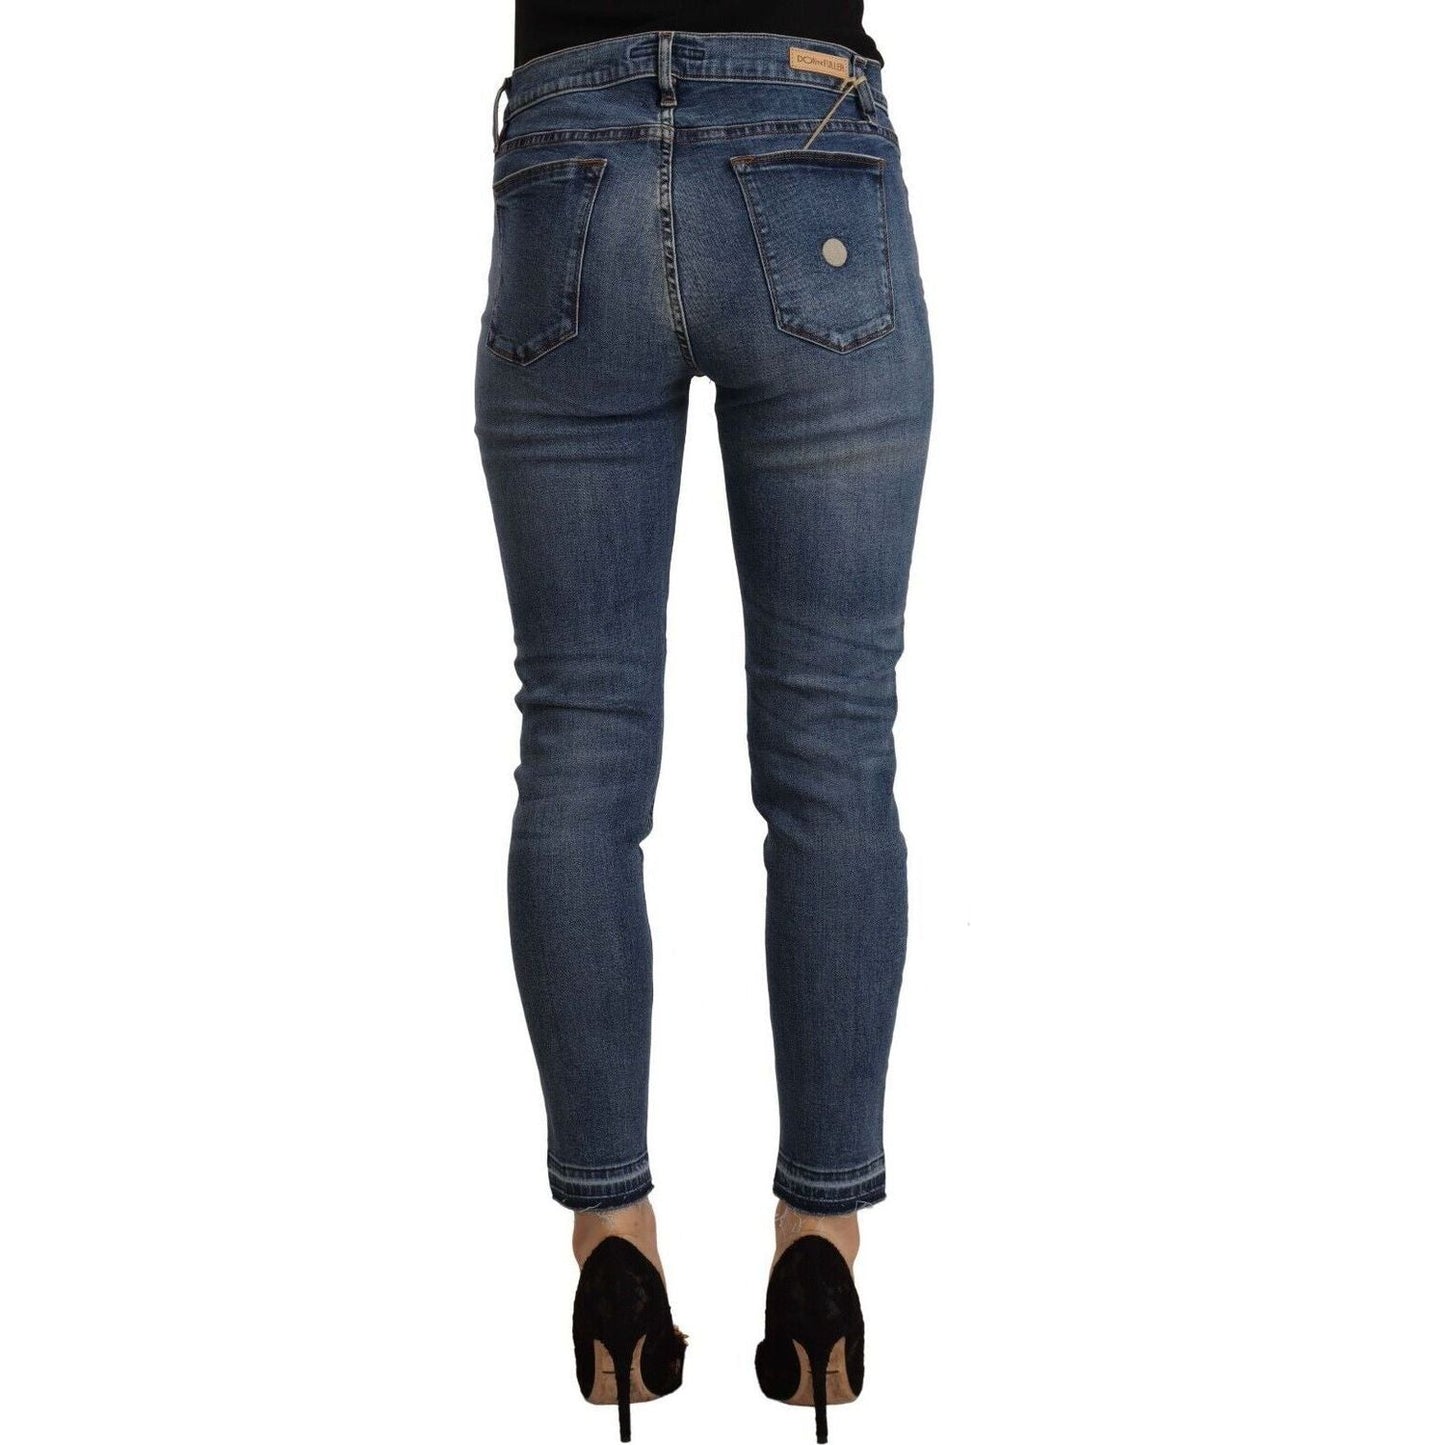 Don The Fuller Chic Slim Fit Blue Washed Jeans blue-mid-waist-cotton-denim-slim-fit-cropped-jeans s-l1600-11-4-b4eb5b9f-43a.jpg